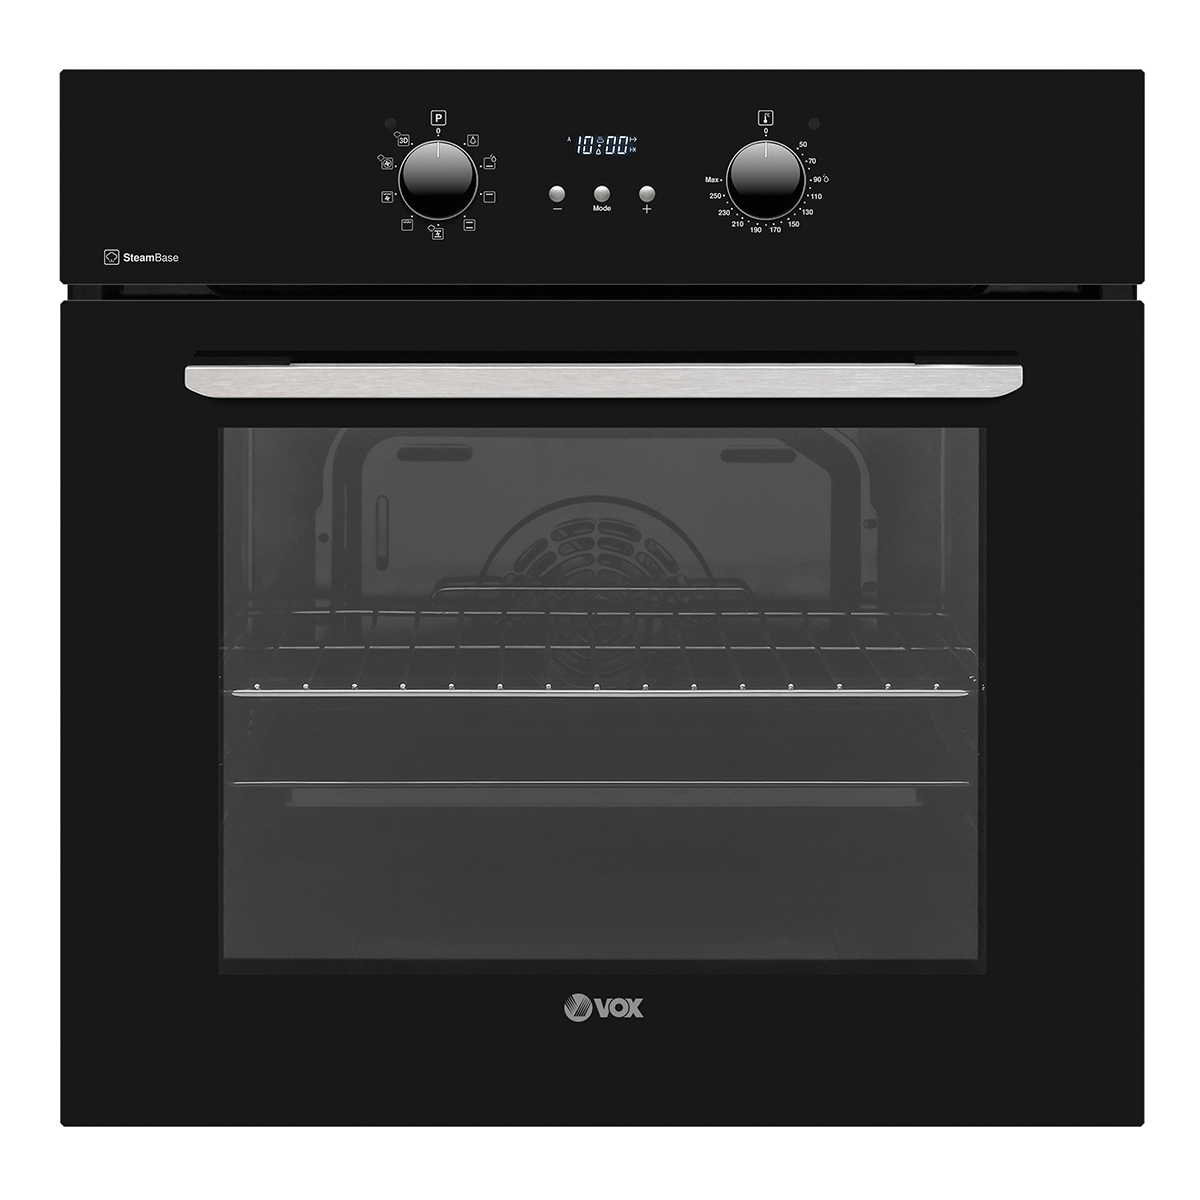 Built-in oven SBD6915B3D 